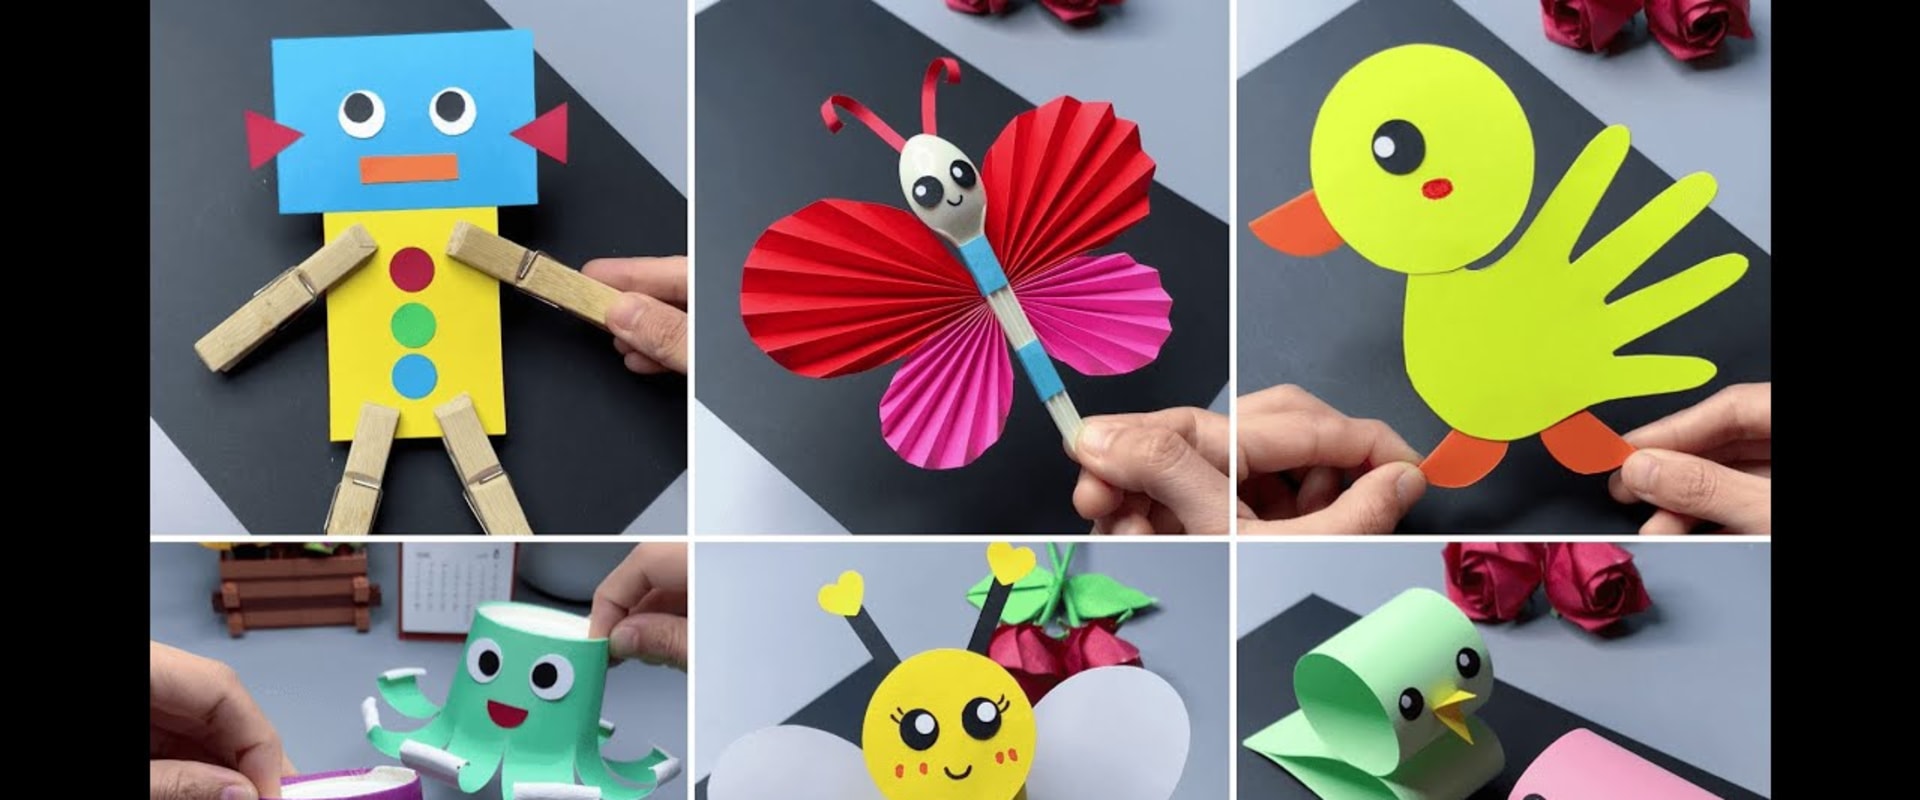 Sculpture Projects for Kids: Fun and Engaging Craft Ideas